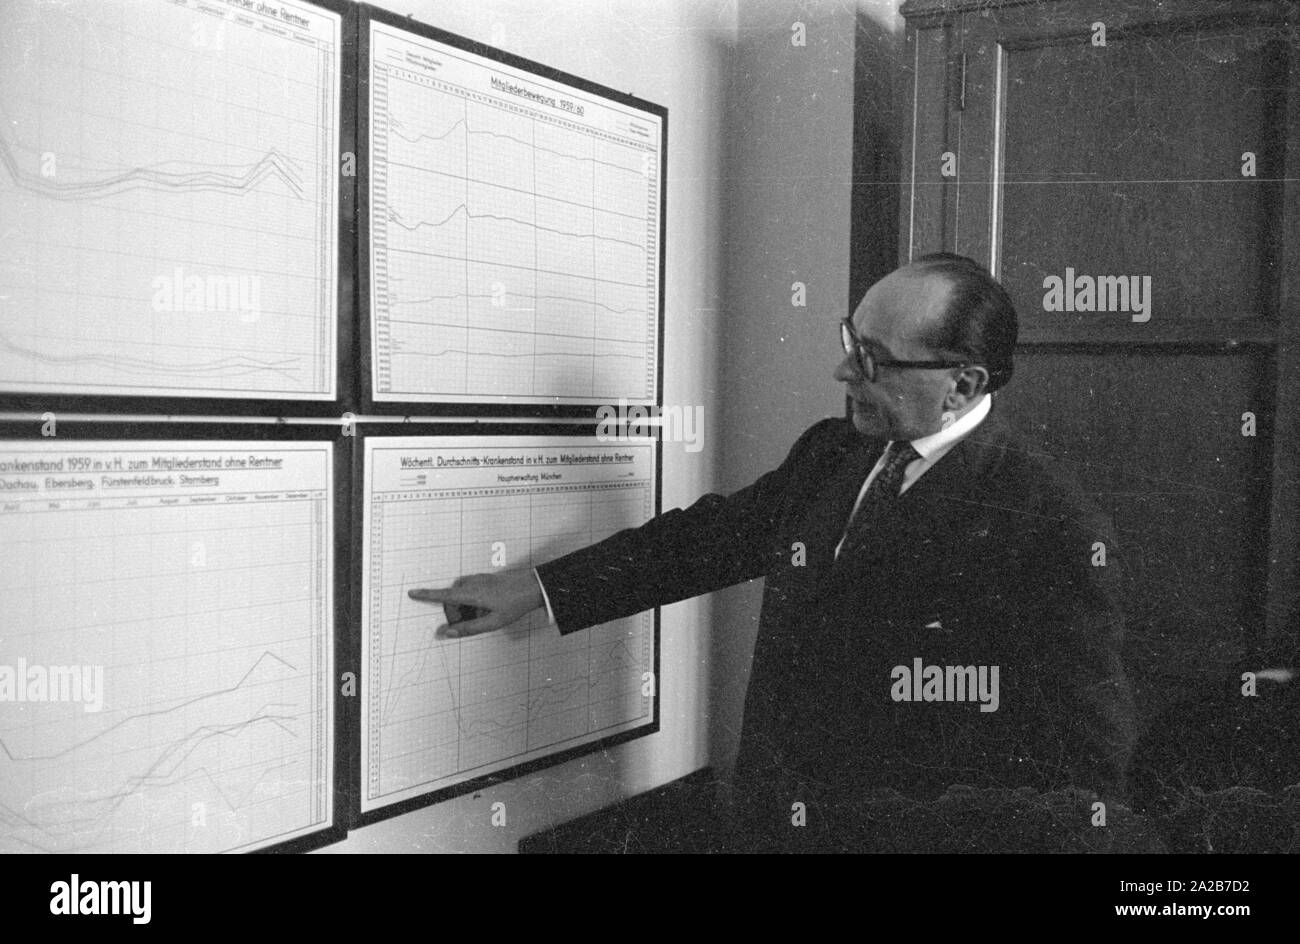 Introduction of a new flu vaccine of the Ravensberg Chemische Fabrik. An employee demonstrates test results based on graphics. Stock Photo